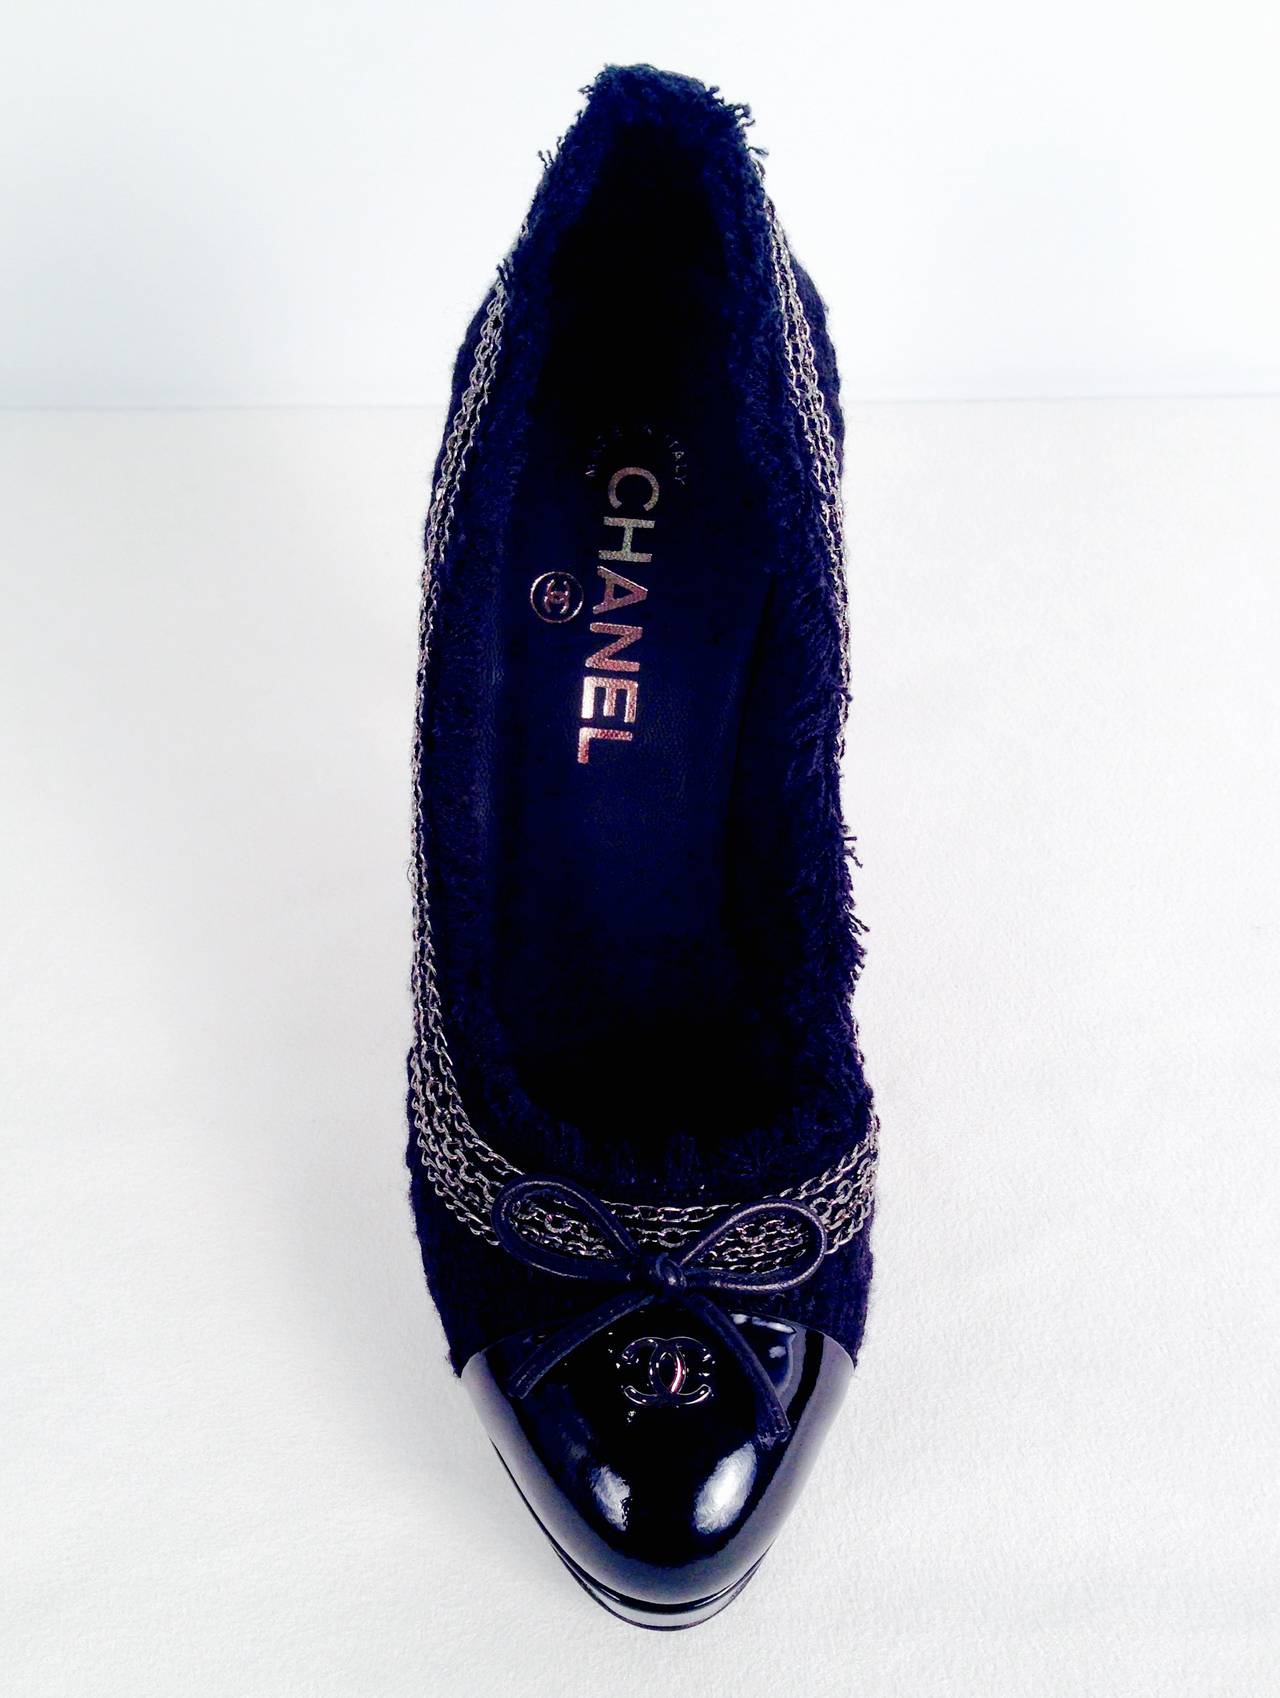 Brand New Chanel Tweed and Patent Leather Platform Pumps With Chain Detail For Sale 4